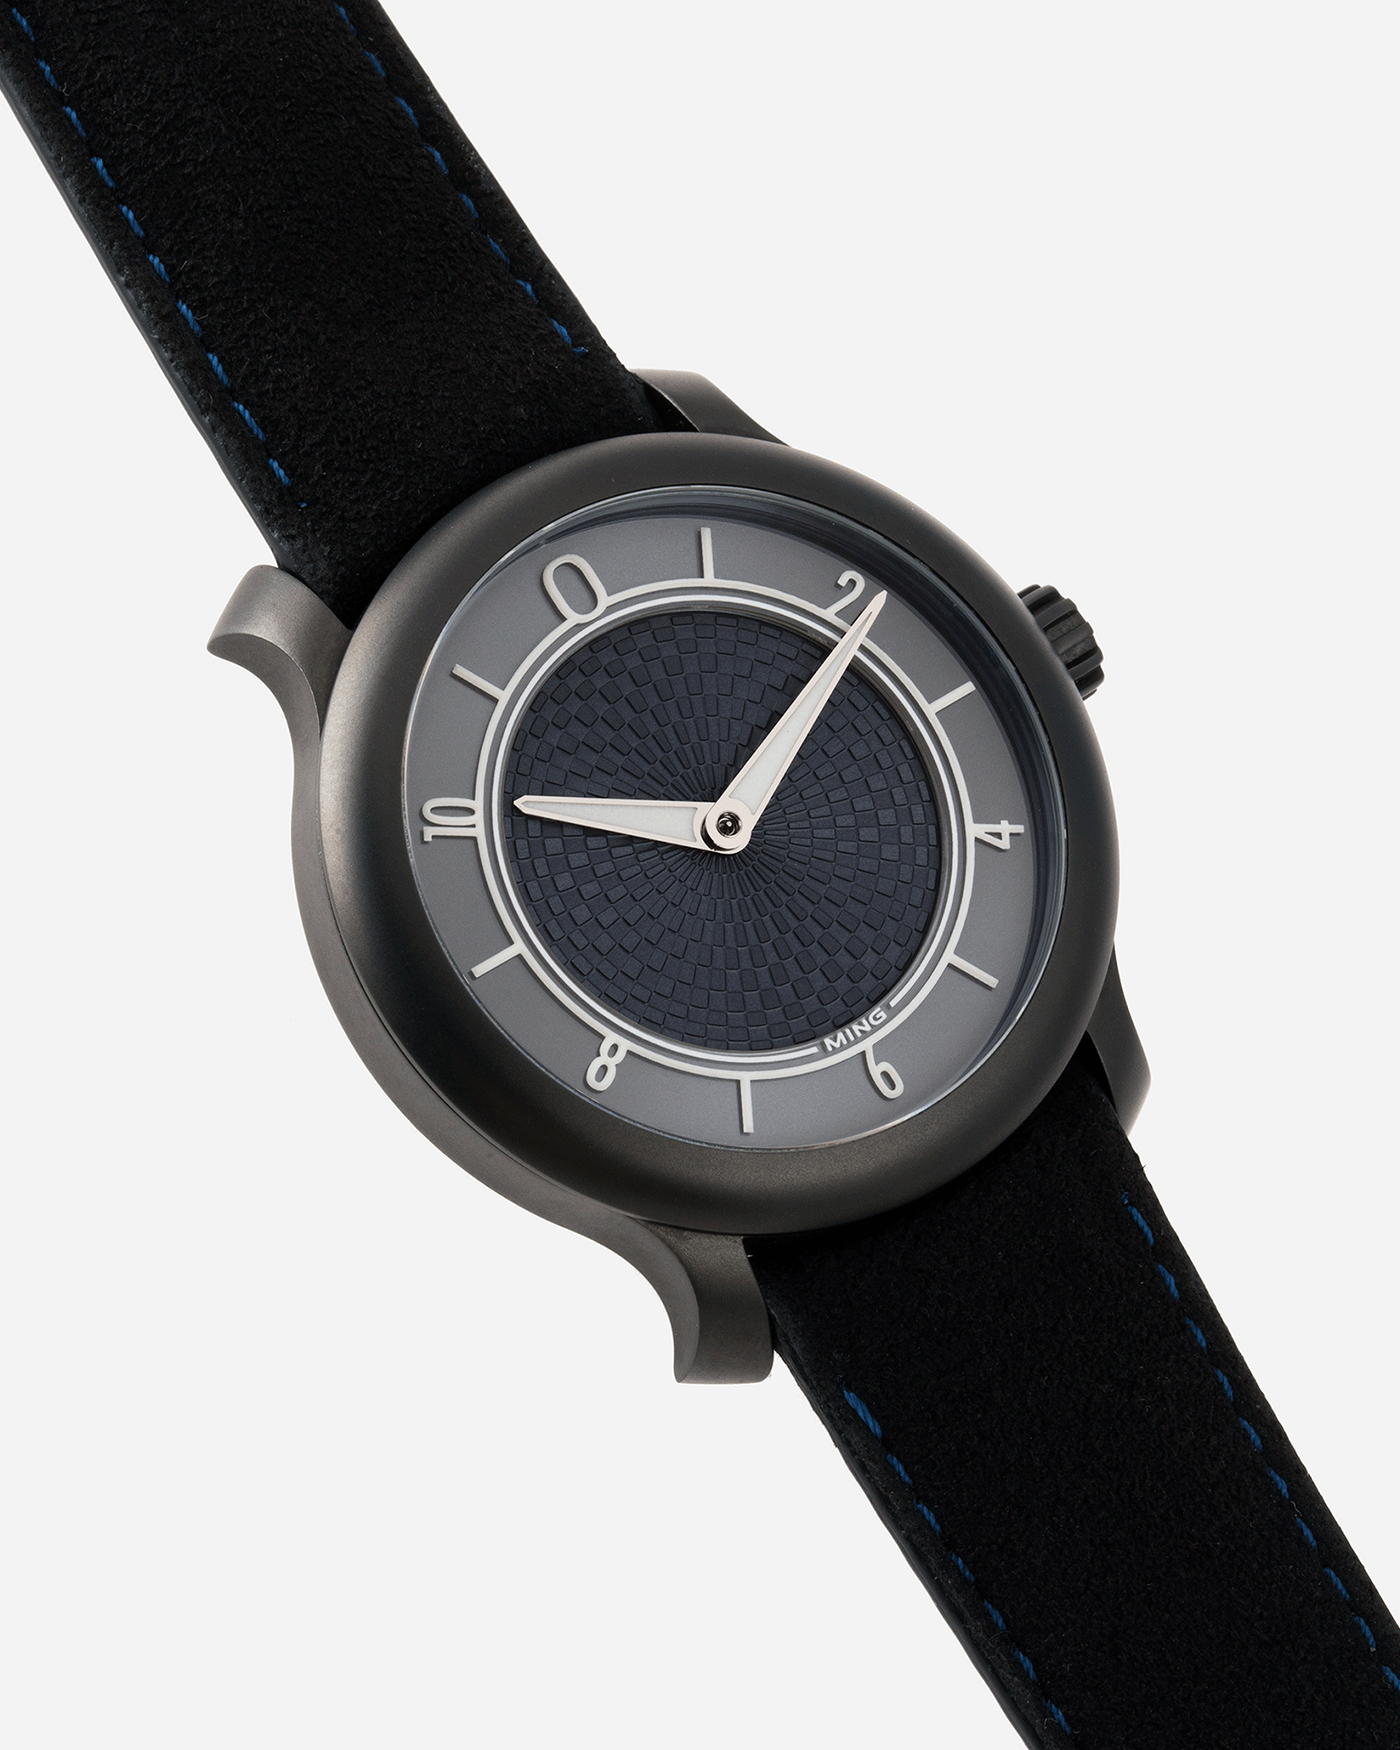 Brand: Ming Year: 2019 Model: 17.06 Special Caves Project Material: Stainless Steel Movement: Heavily Modified ETA 2824-2 Case Diameter: 38mm Strap: Jean Rousseau Black Suede with Blue Stitching for MING